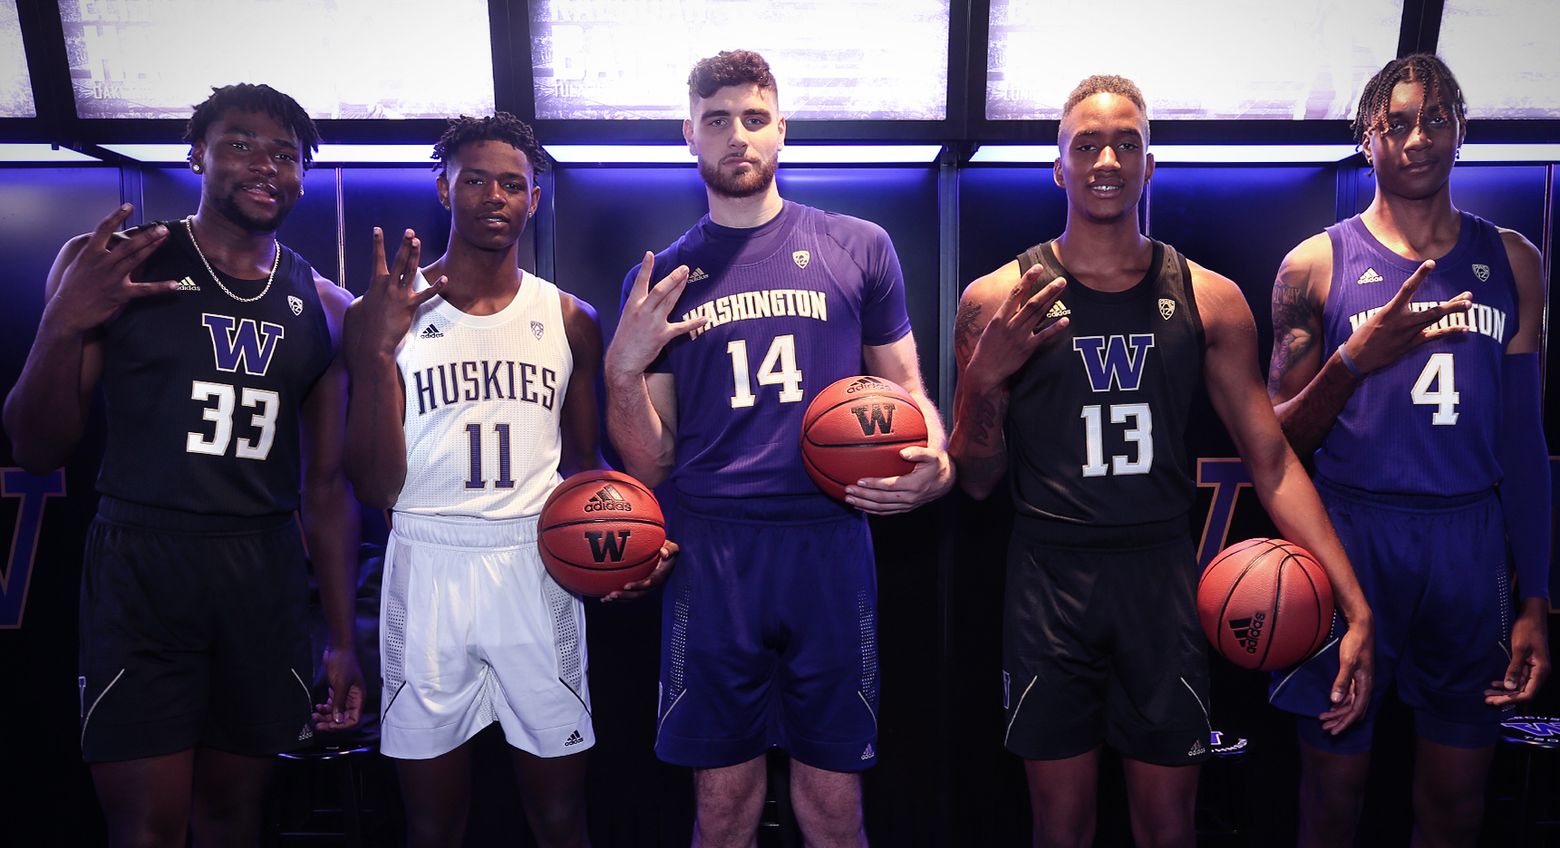 What might the UW Huskies' new Adidas uniforms look like? Here are